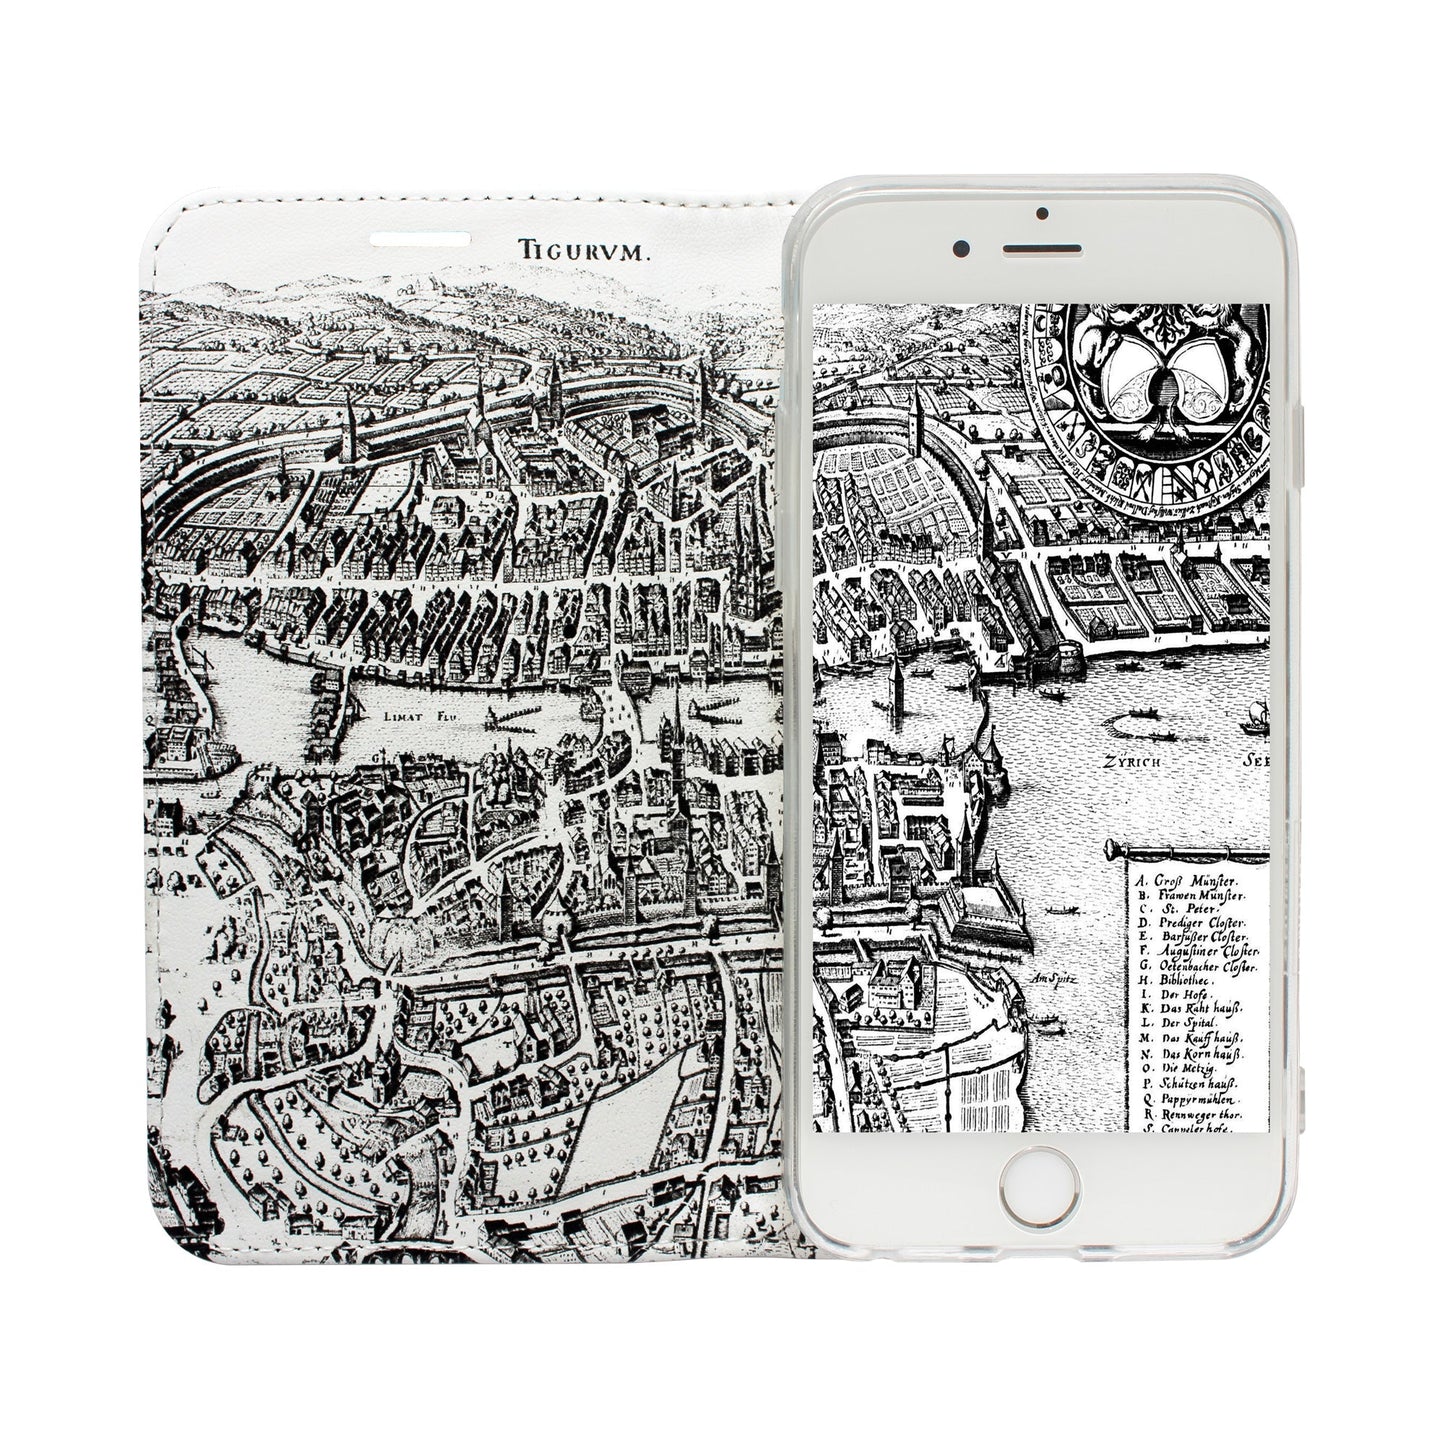 Zurich Merian Panorama Case for iPhone 5/5S/SE 1